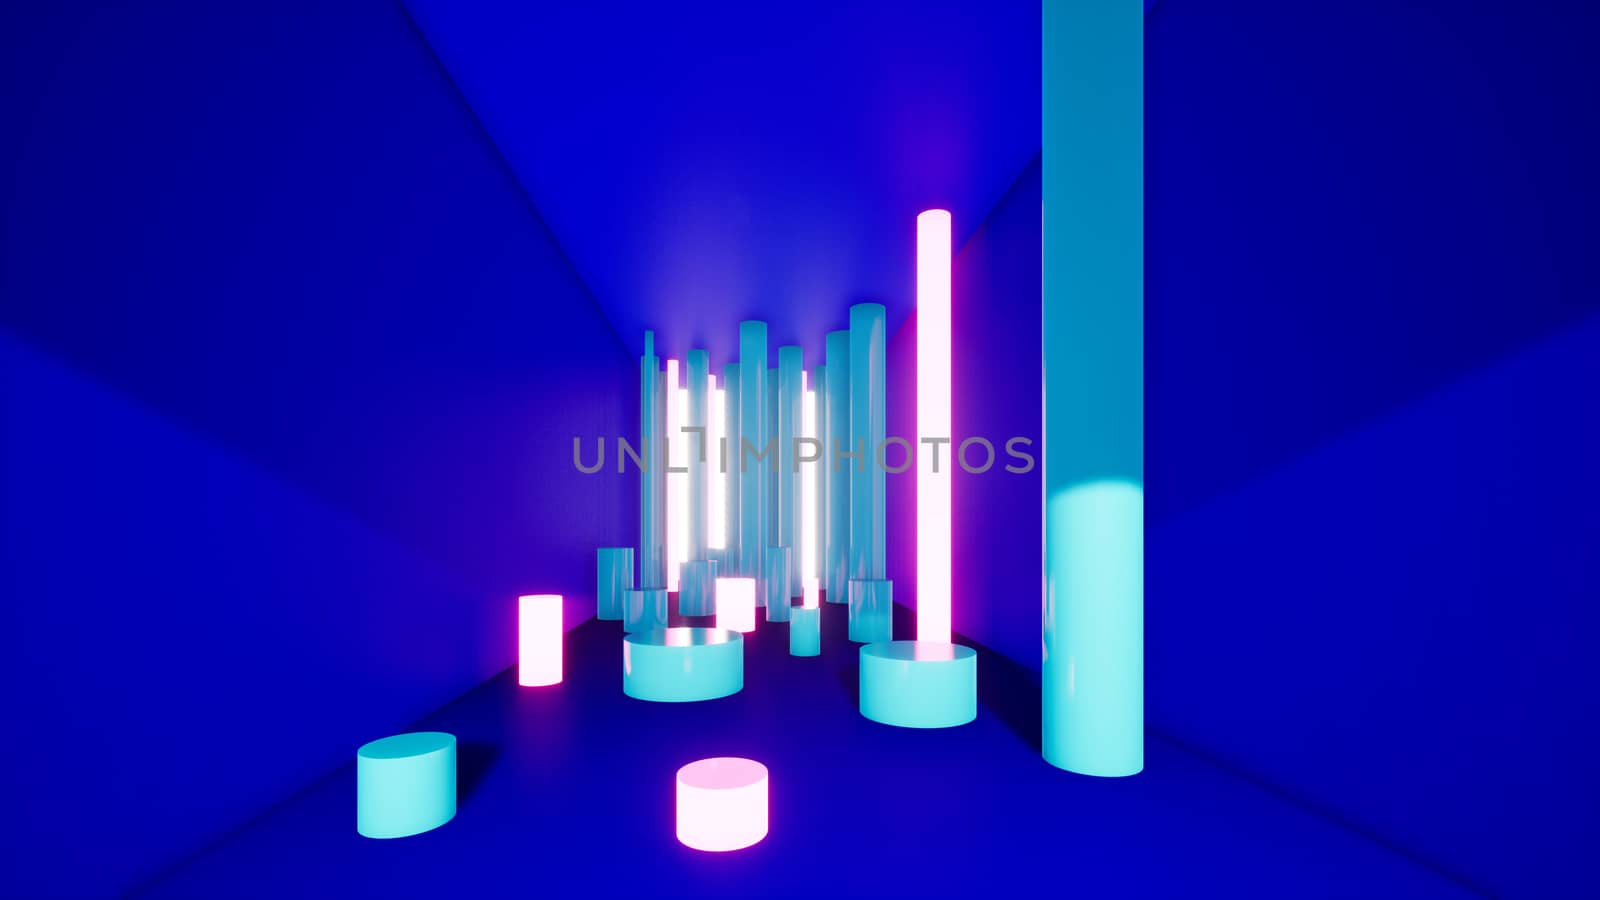 abstract purple background design with colorful neon pipes, 3d render by CREATIVEWONDER